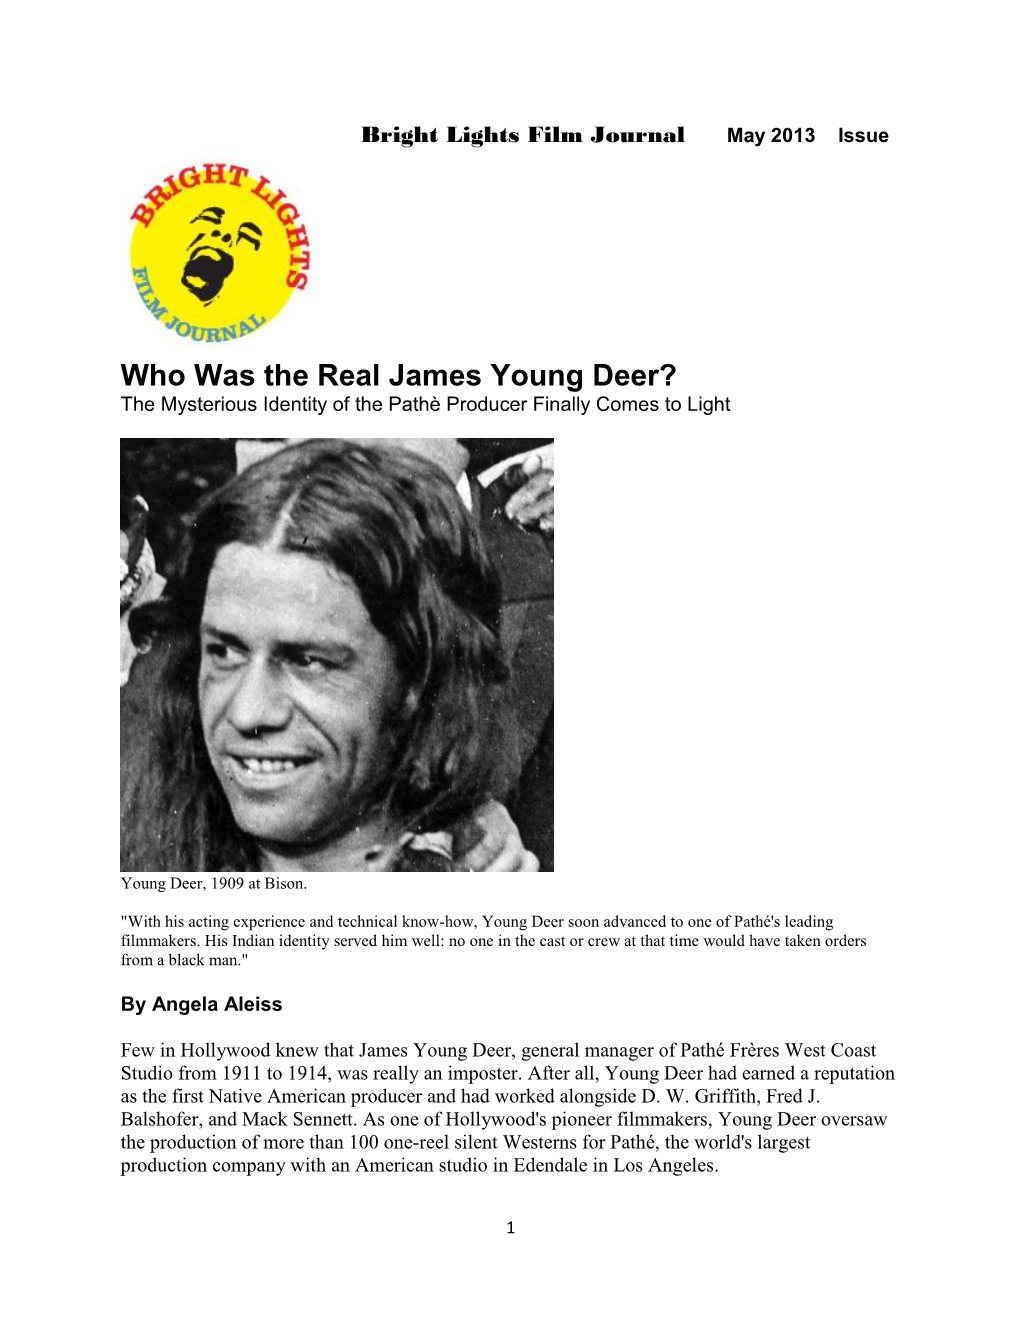 Who Was the Real James Young Deer? the Mysterious Identity of the Pathè Producer Finally Comes to Light